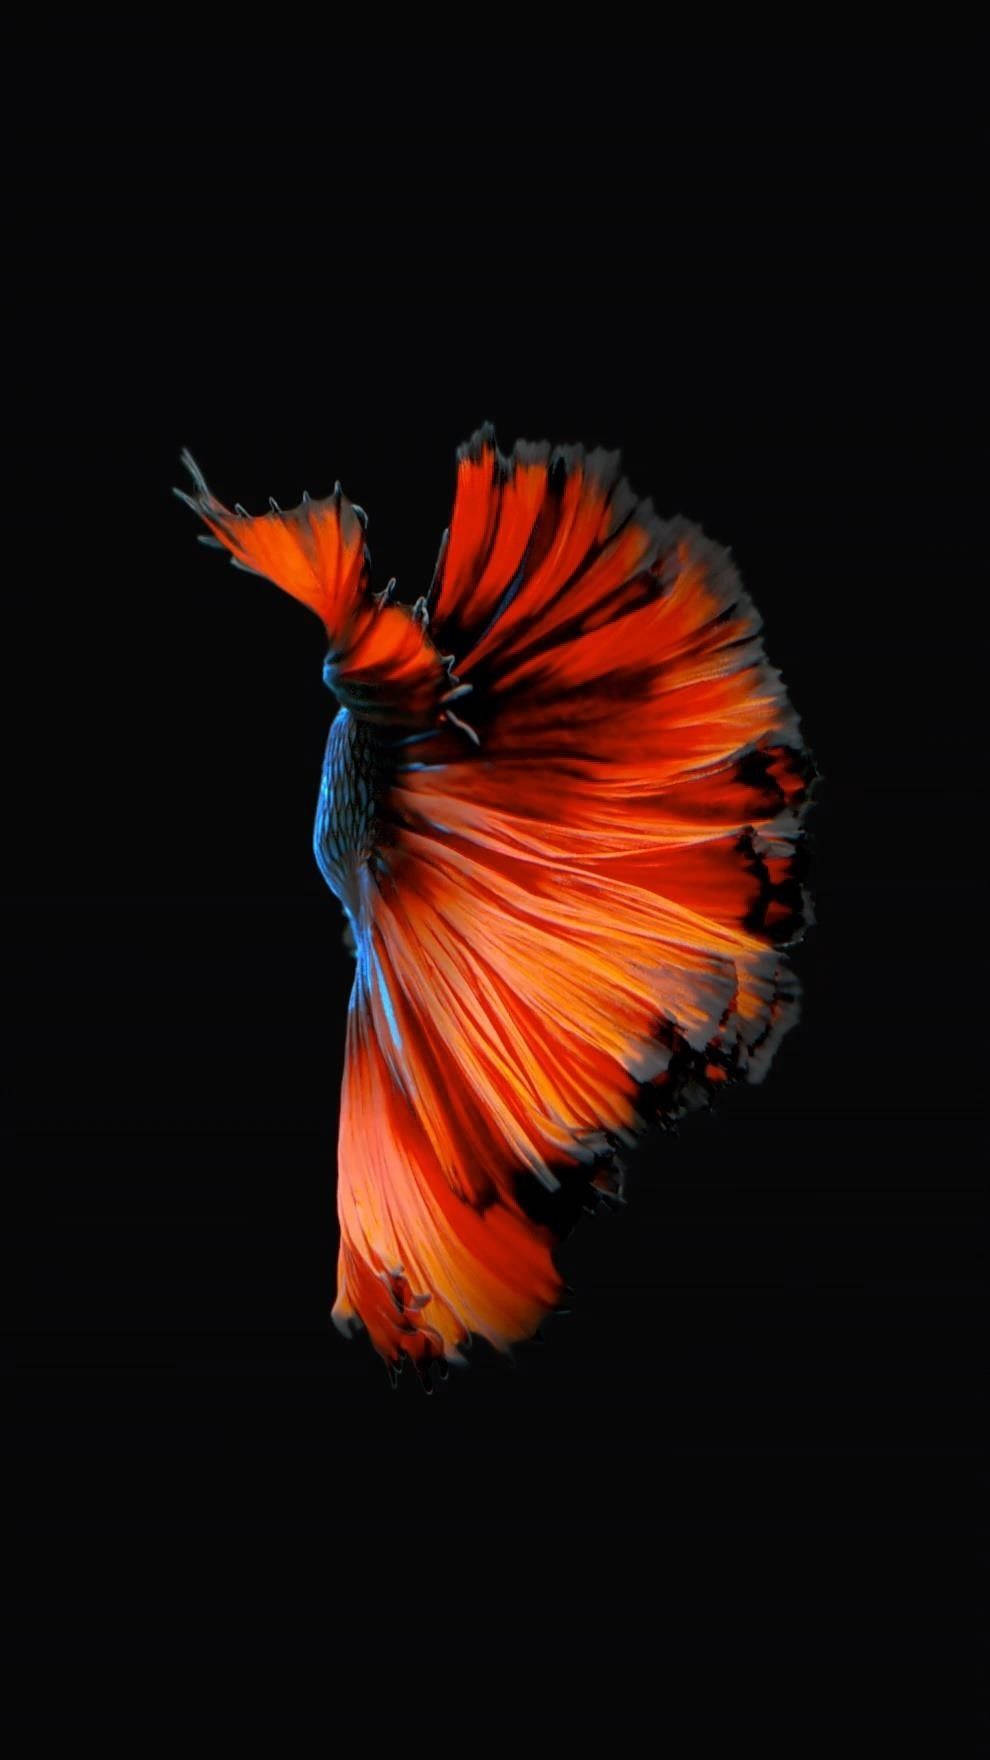 A fiery-hued schooling fish ready to swim to new adventures Wallpaper